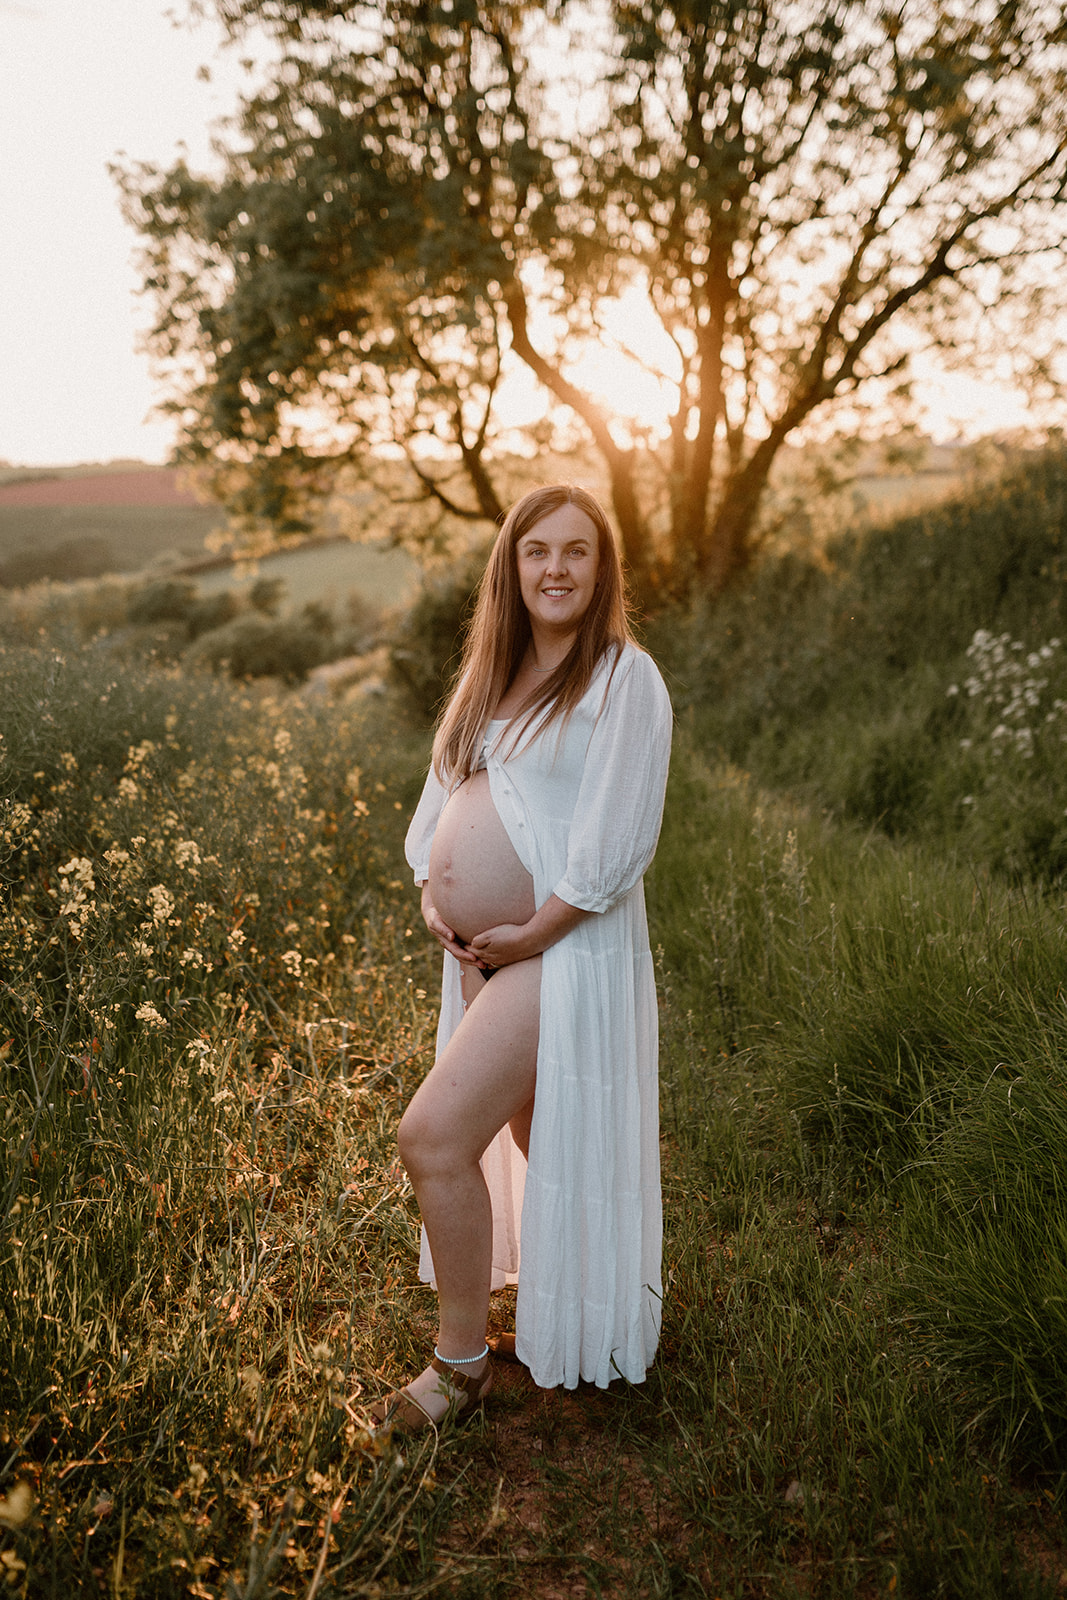 Expectant mother cradles bump at sunset photo session.